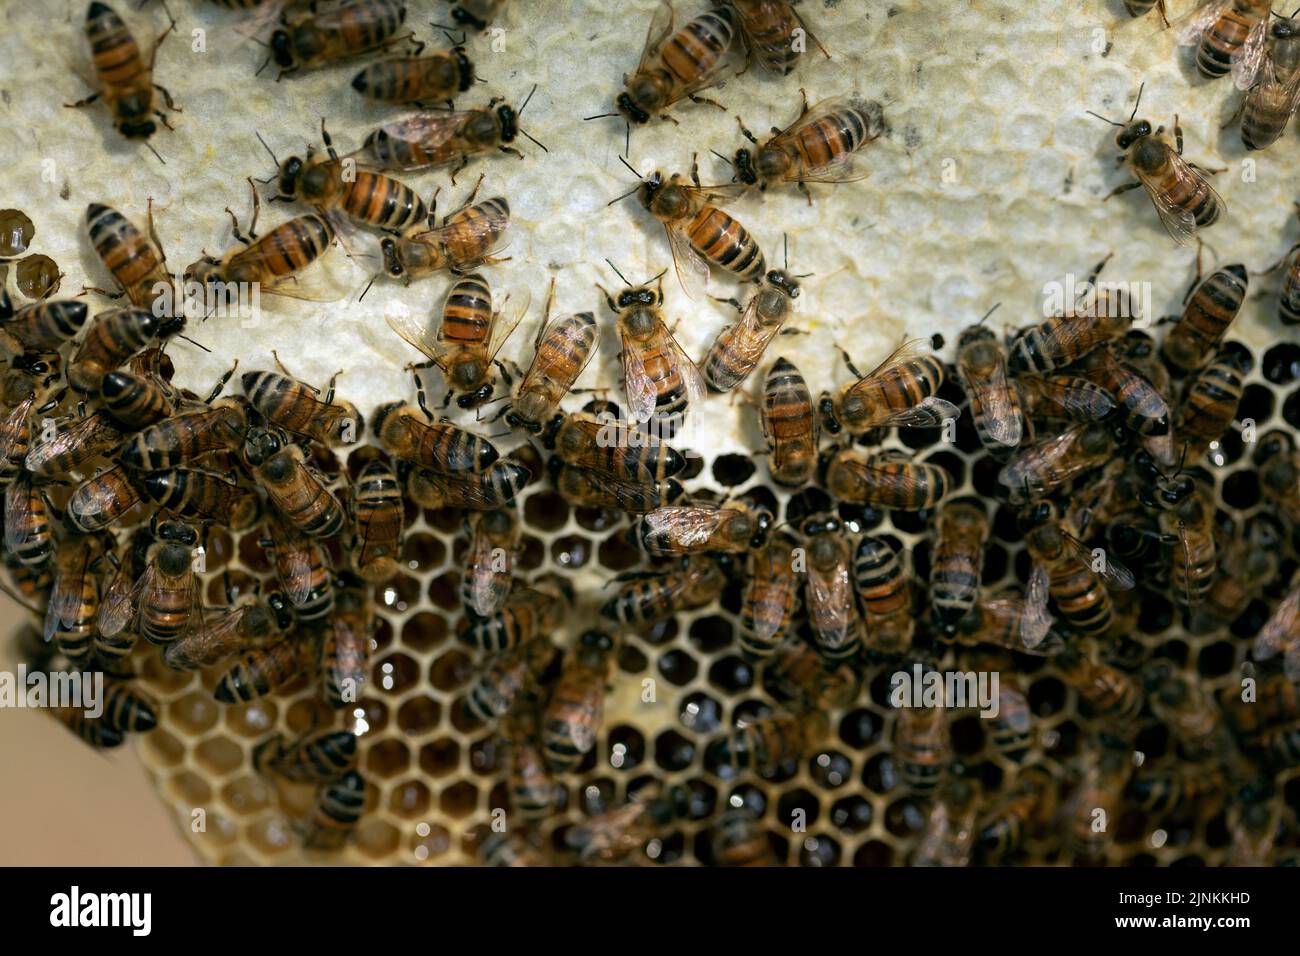 Bees in the process of collecting nectar inside a natural honeycomb. Stock Photo